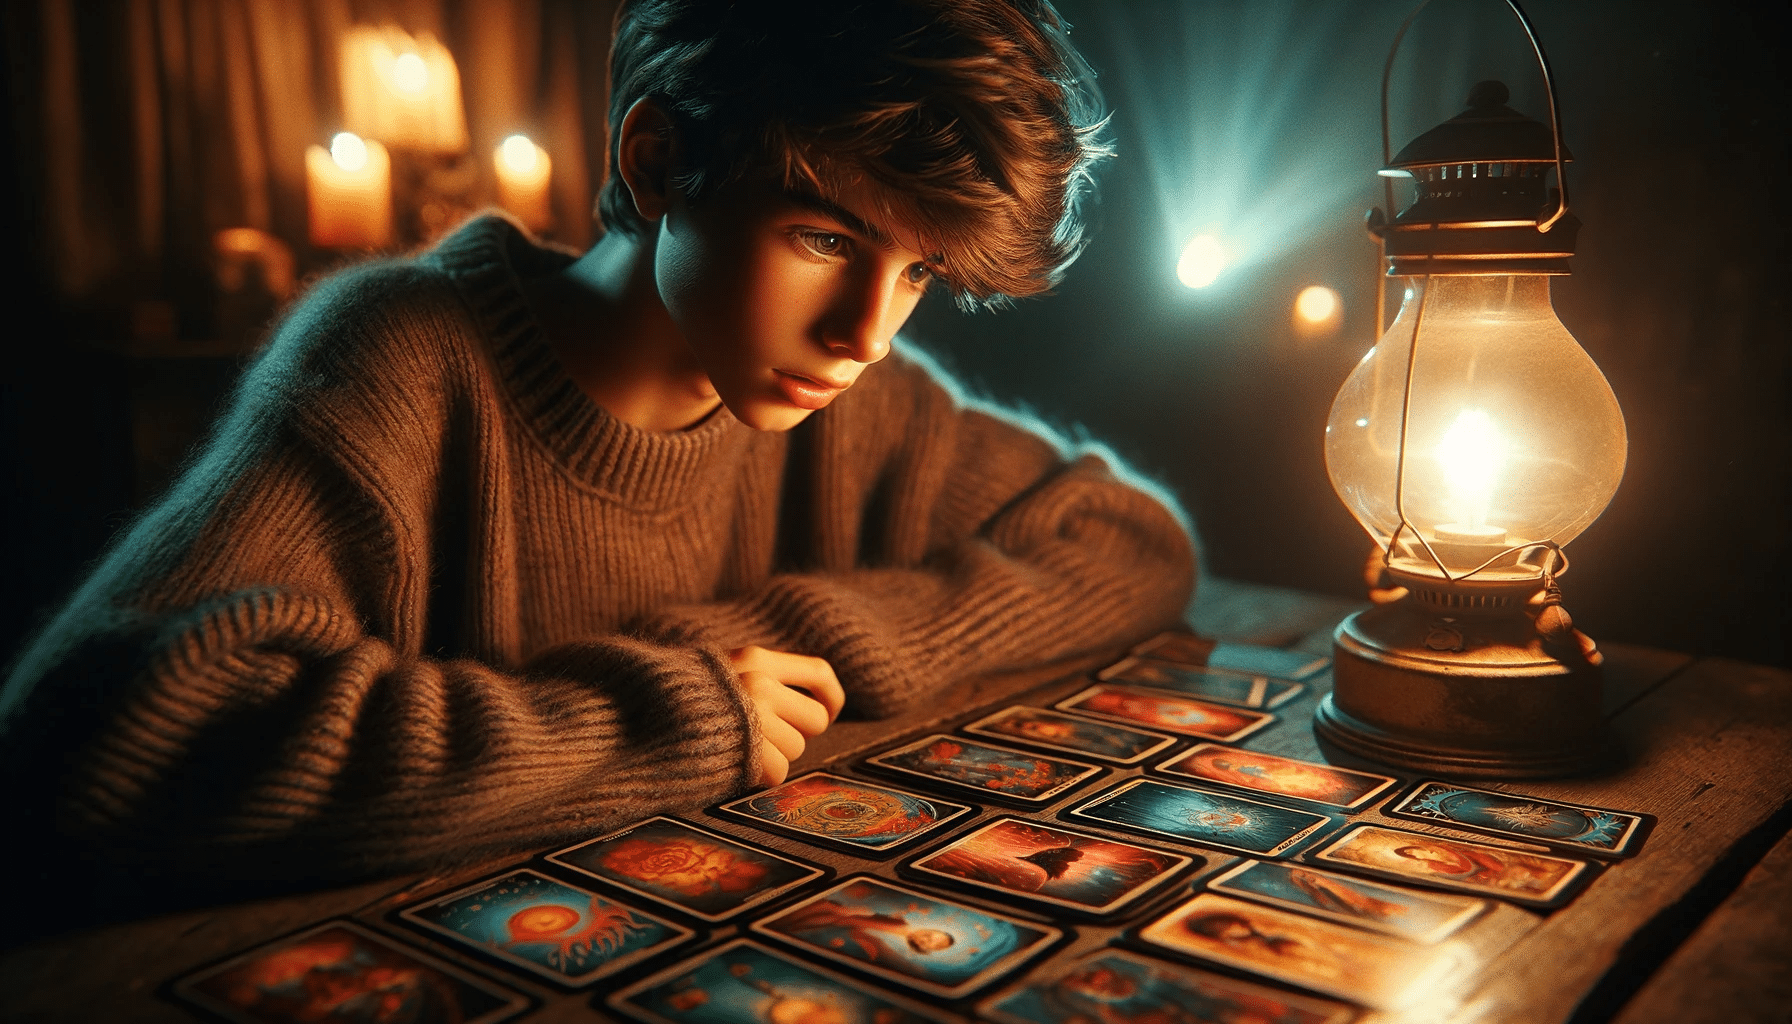 A young person learns interpreting tarot cards for beginners by examining colorful cards under a cozy lamp.